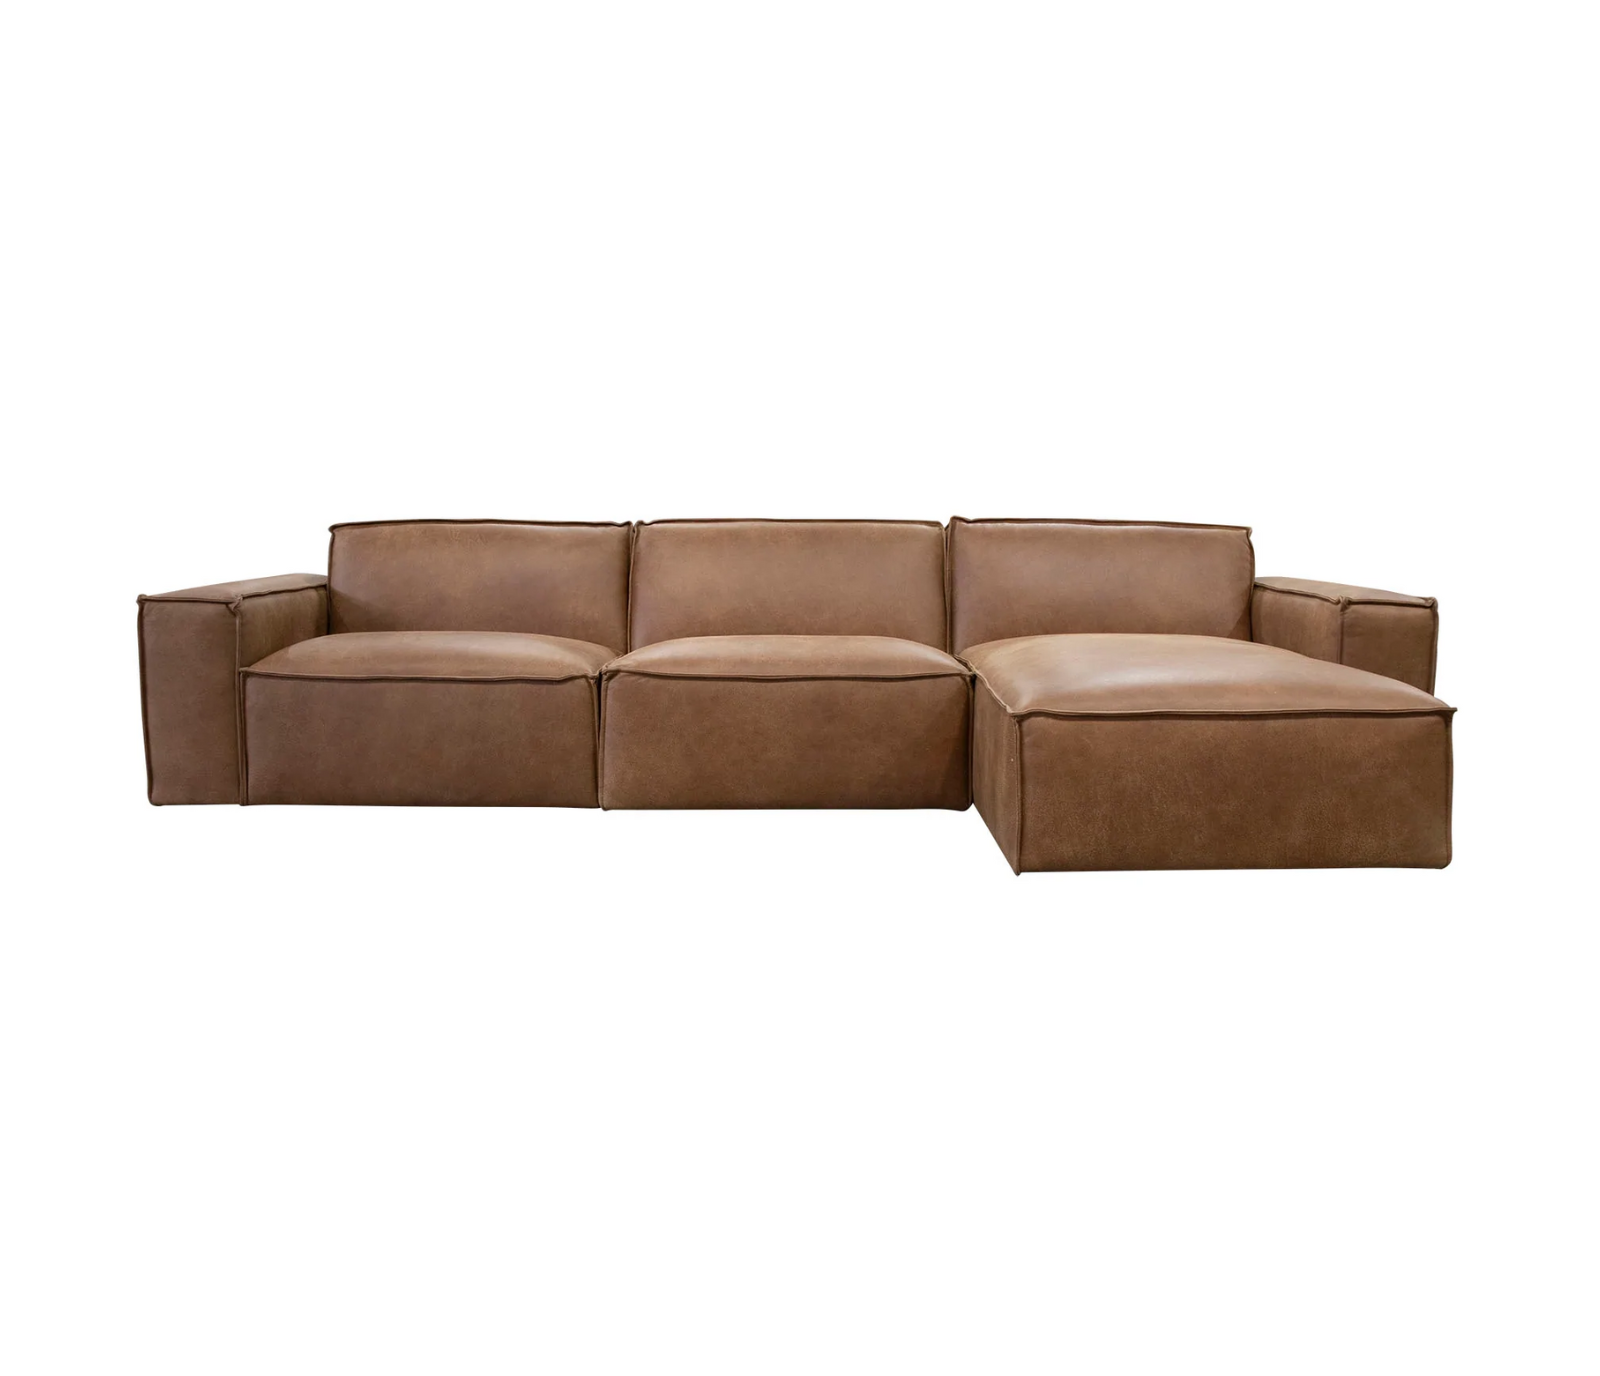 Bunny 3 Piece Sectional - Natural Cognac Leather